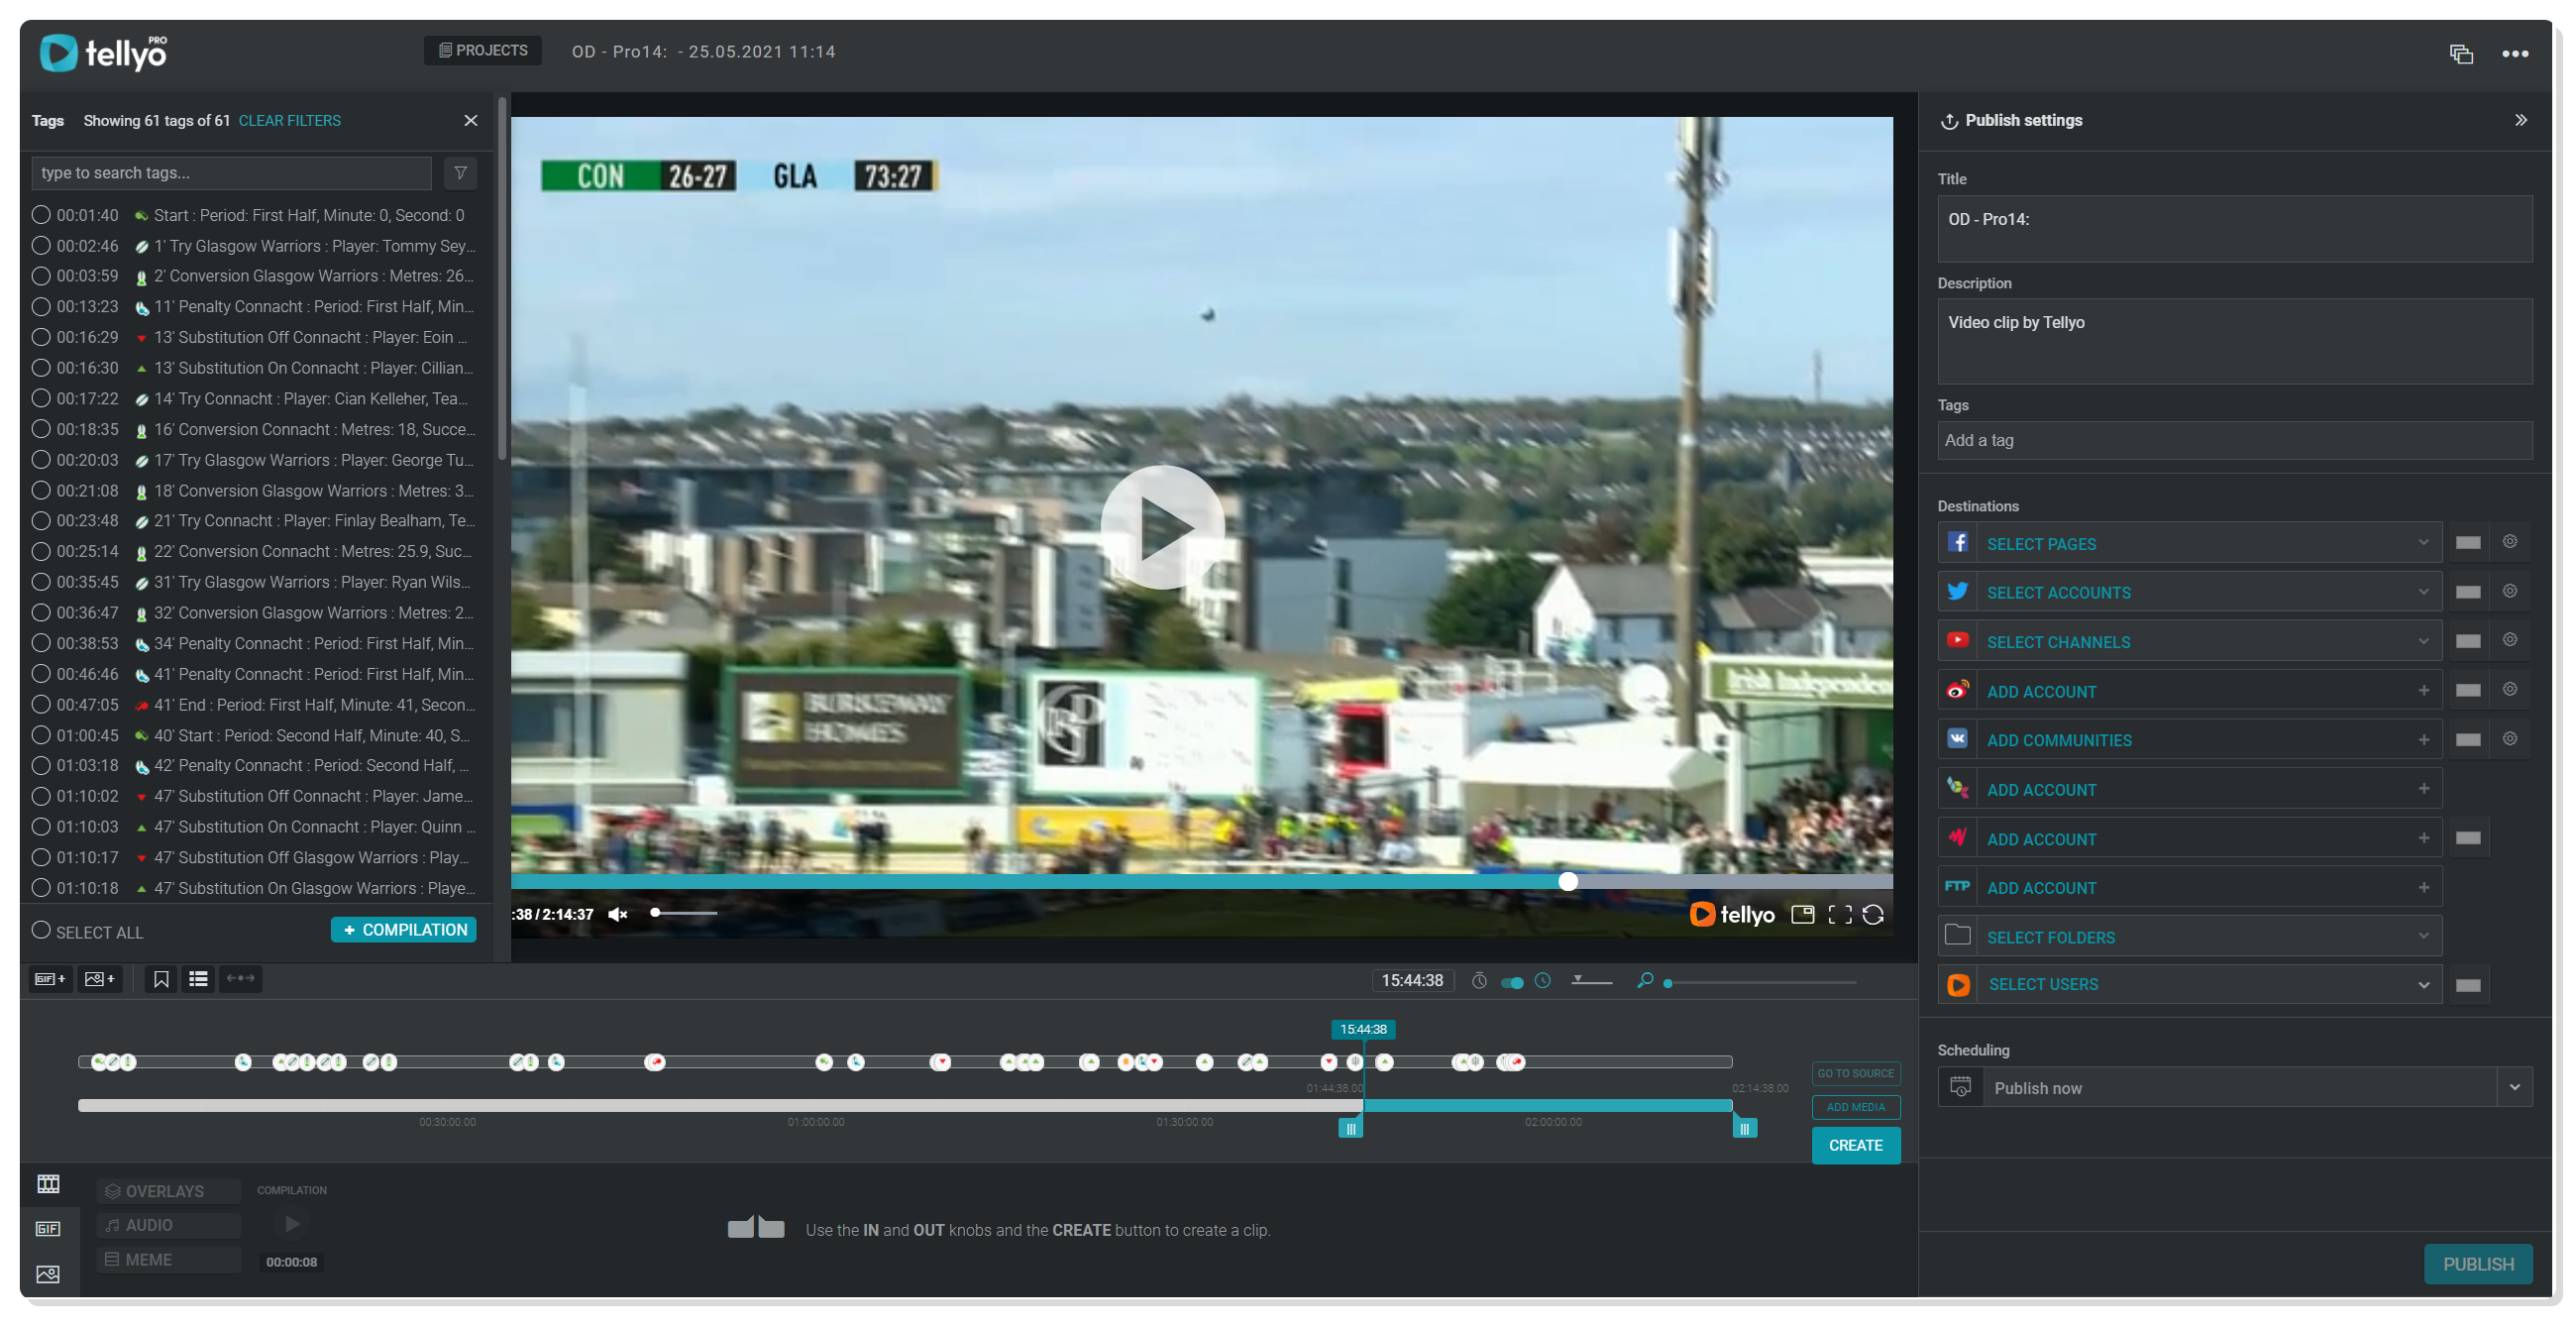 Guinness PRO14 – how video results skyrocketed for this unique and amazing tournament